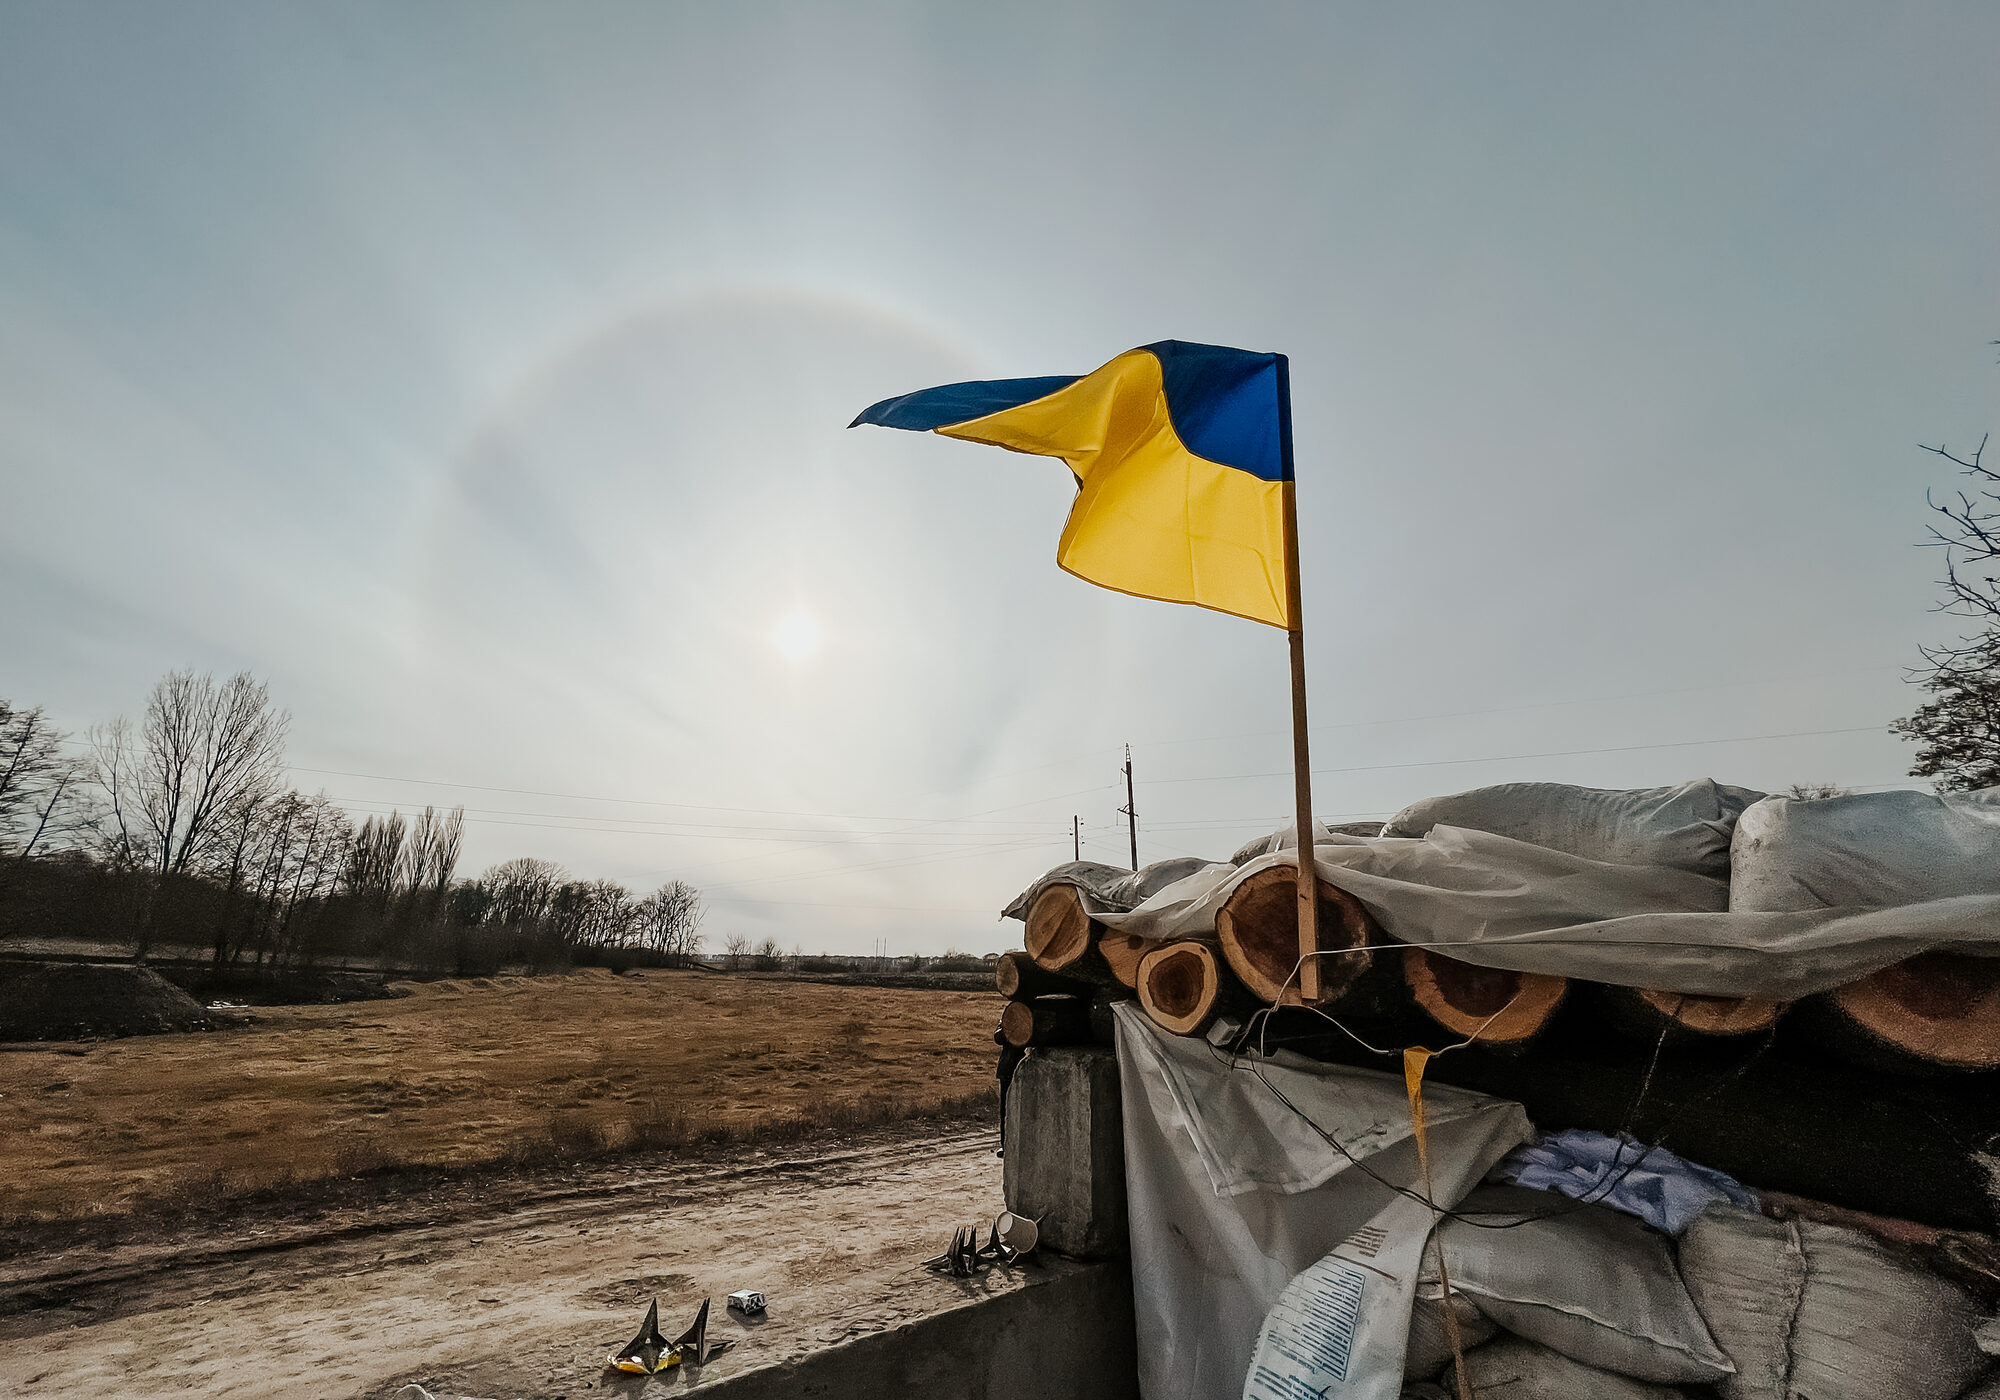 12.03.2022 Irpin, Ukraine: self-made checkpoint at the entrance to the village to check cars and detect saboteurs or stop enemy vehicles. The yellow and blue flag of Ukraine is hoisted over the post